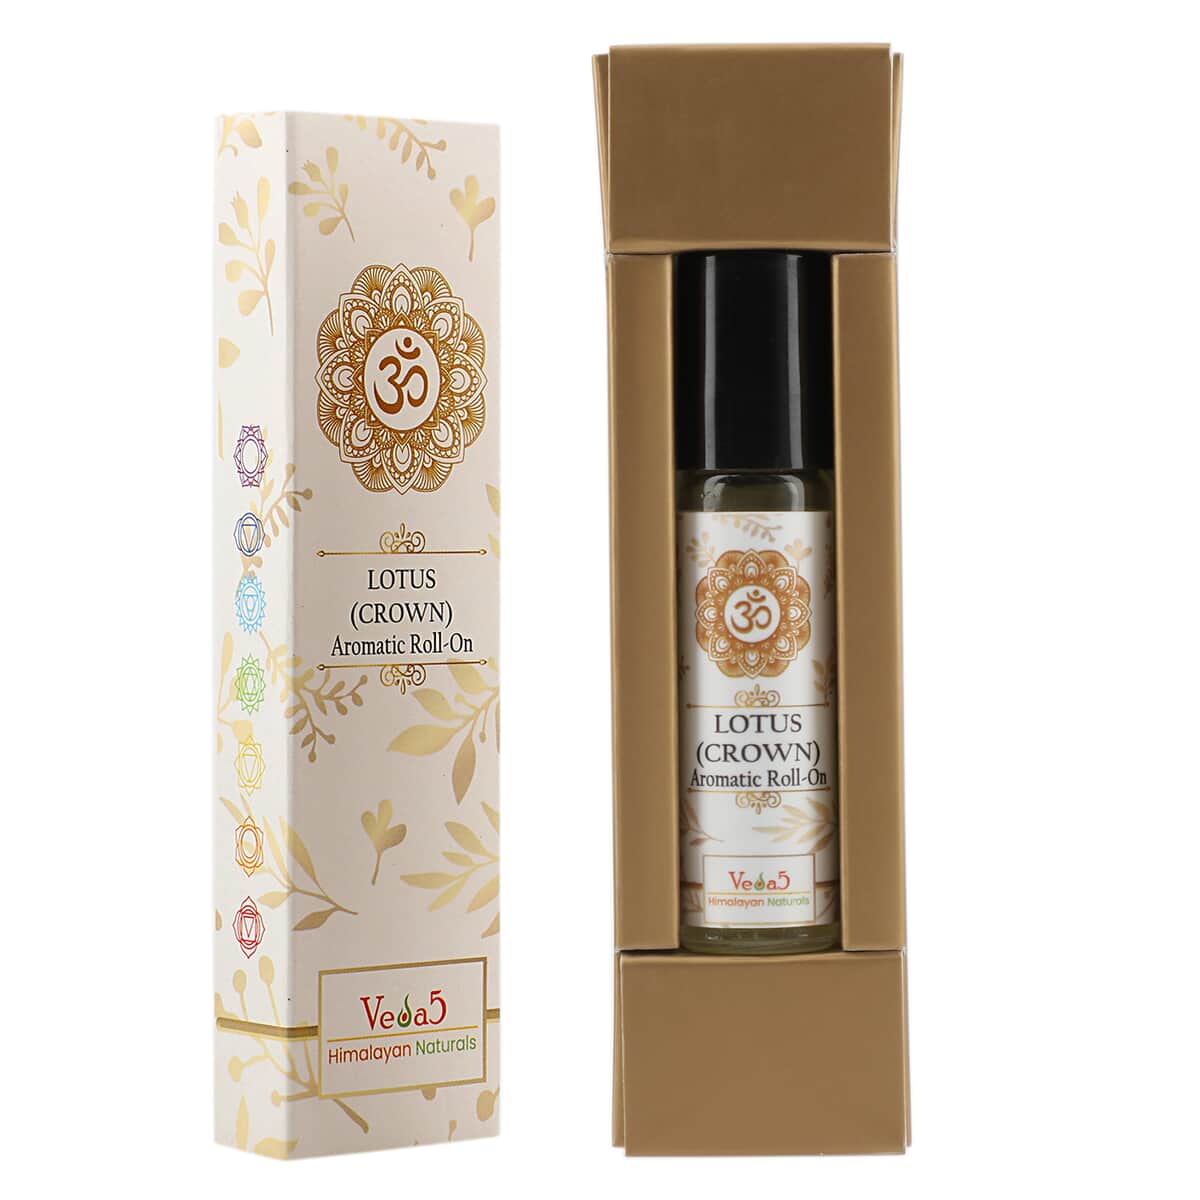 Veda5 Himalayan Naturals Lotus Crown Aromatic Roll-On 8ml image number 4